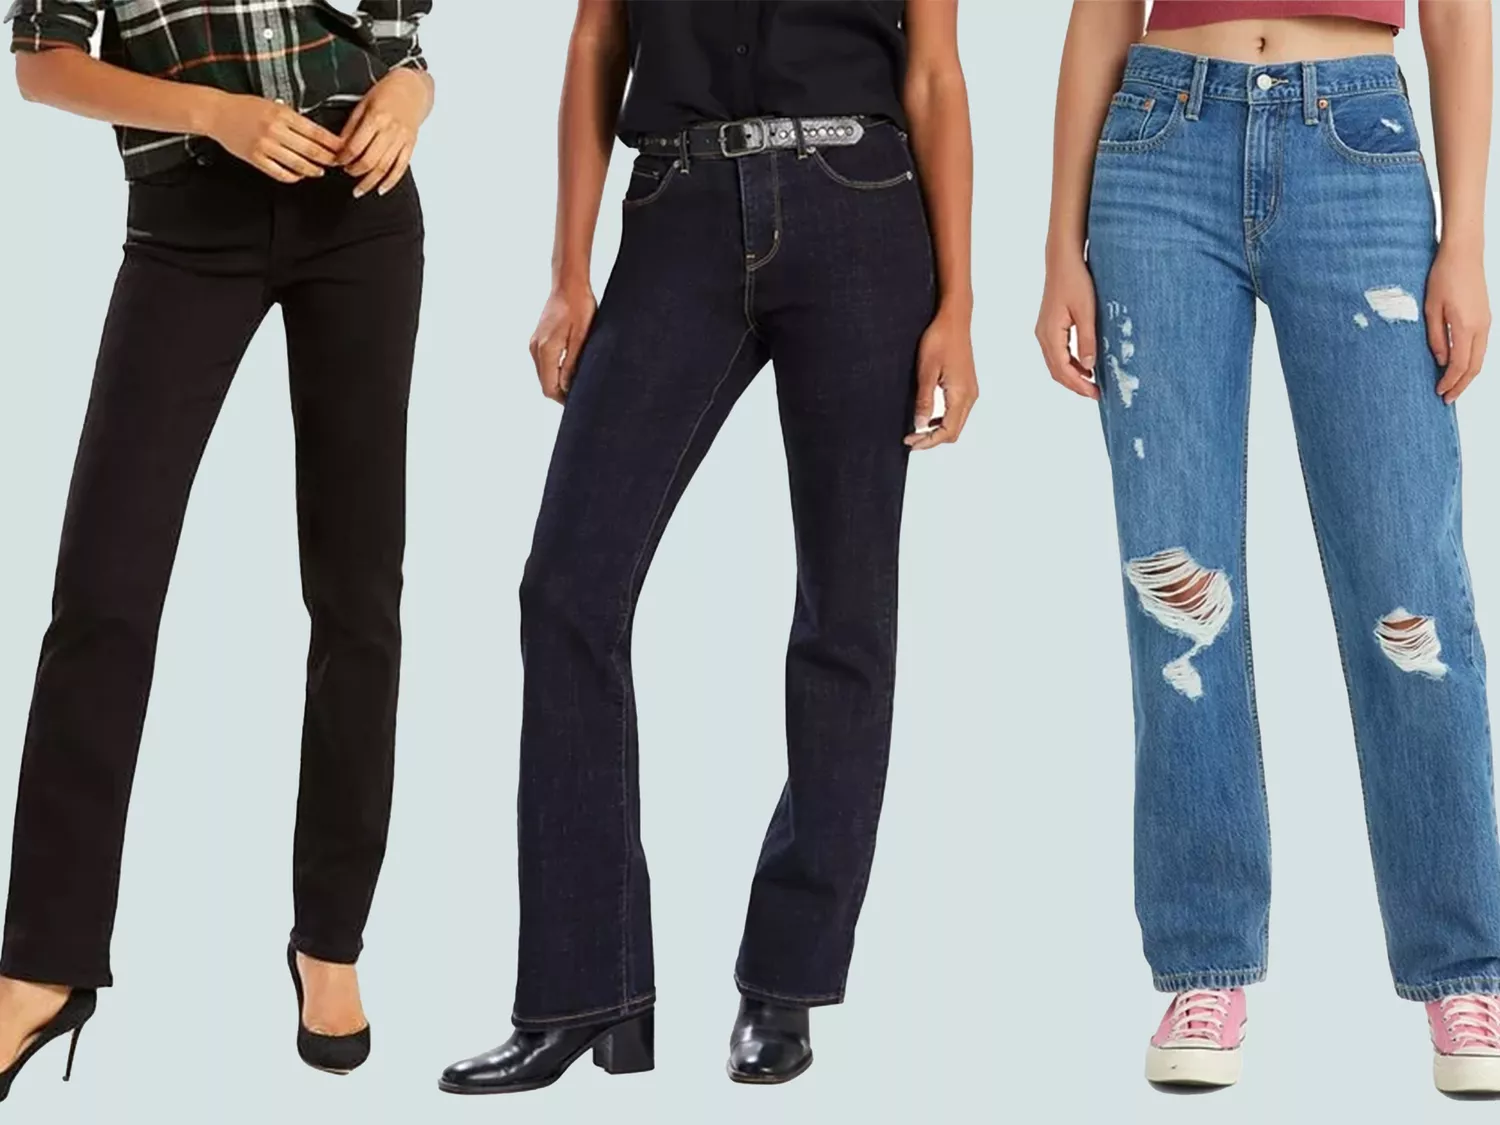 This Secret Sale on Levi’s Includes So Many Pairs of Jeans for Up to 55% Off